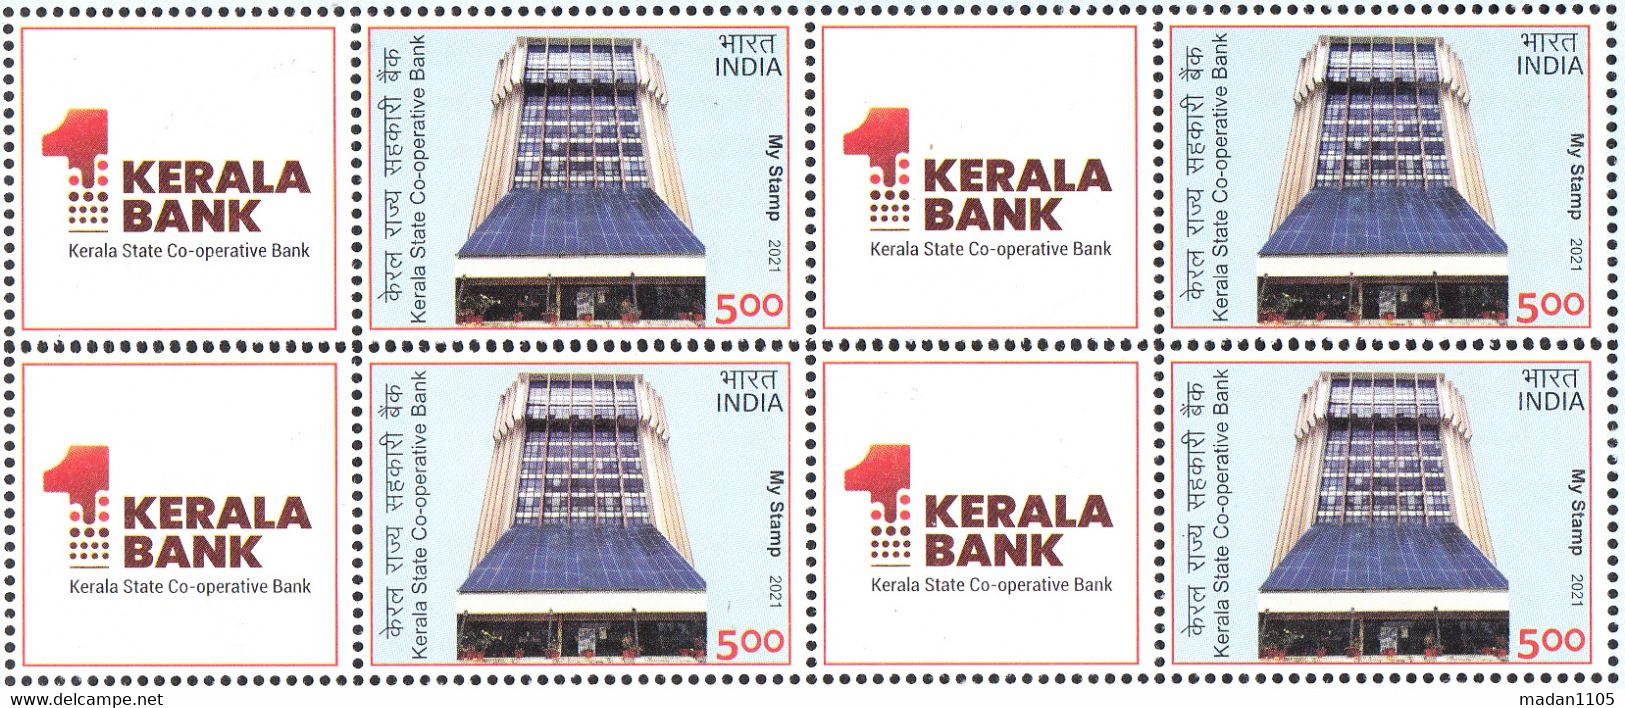 INDIA 2021 MY STAMP, KERALA STATE CO-OPERATIVE BANK. 769 Branches Across Kerala,Block Of 4,LIMITED ISSUE, MNH(**) - Unused Stamps